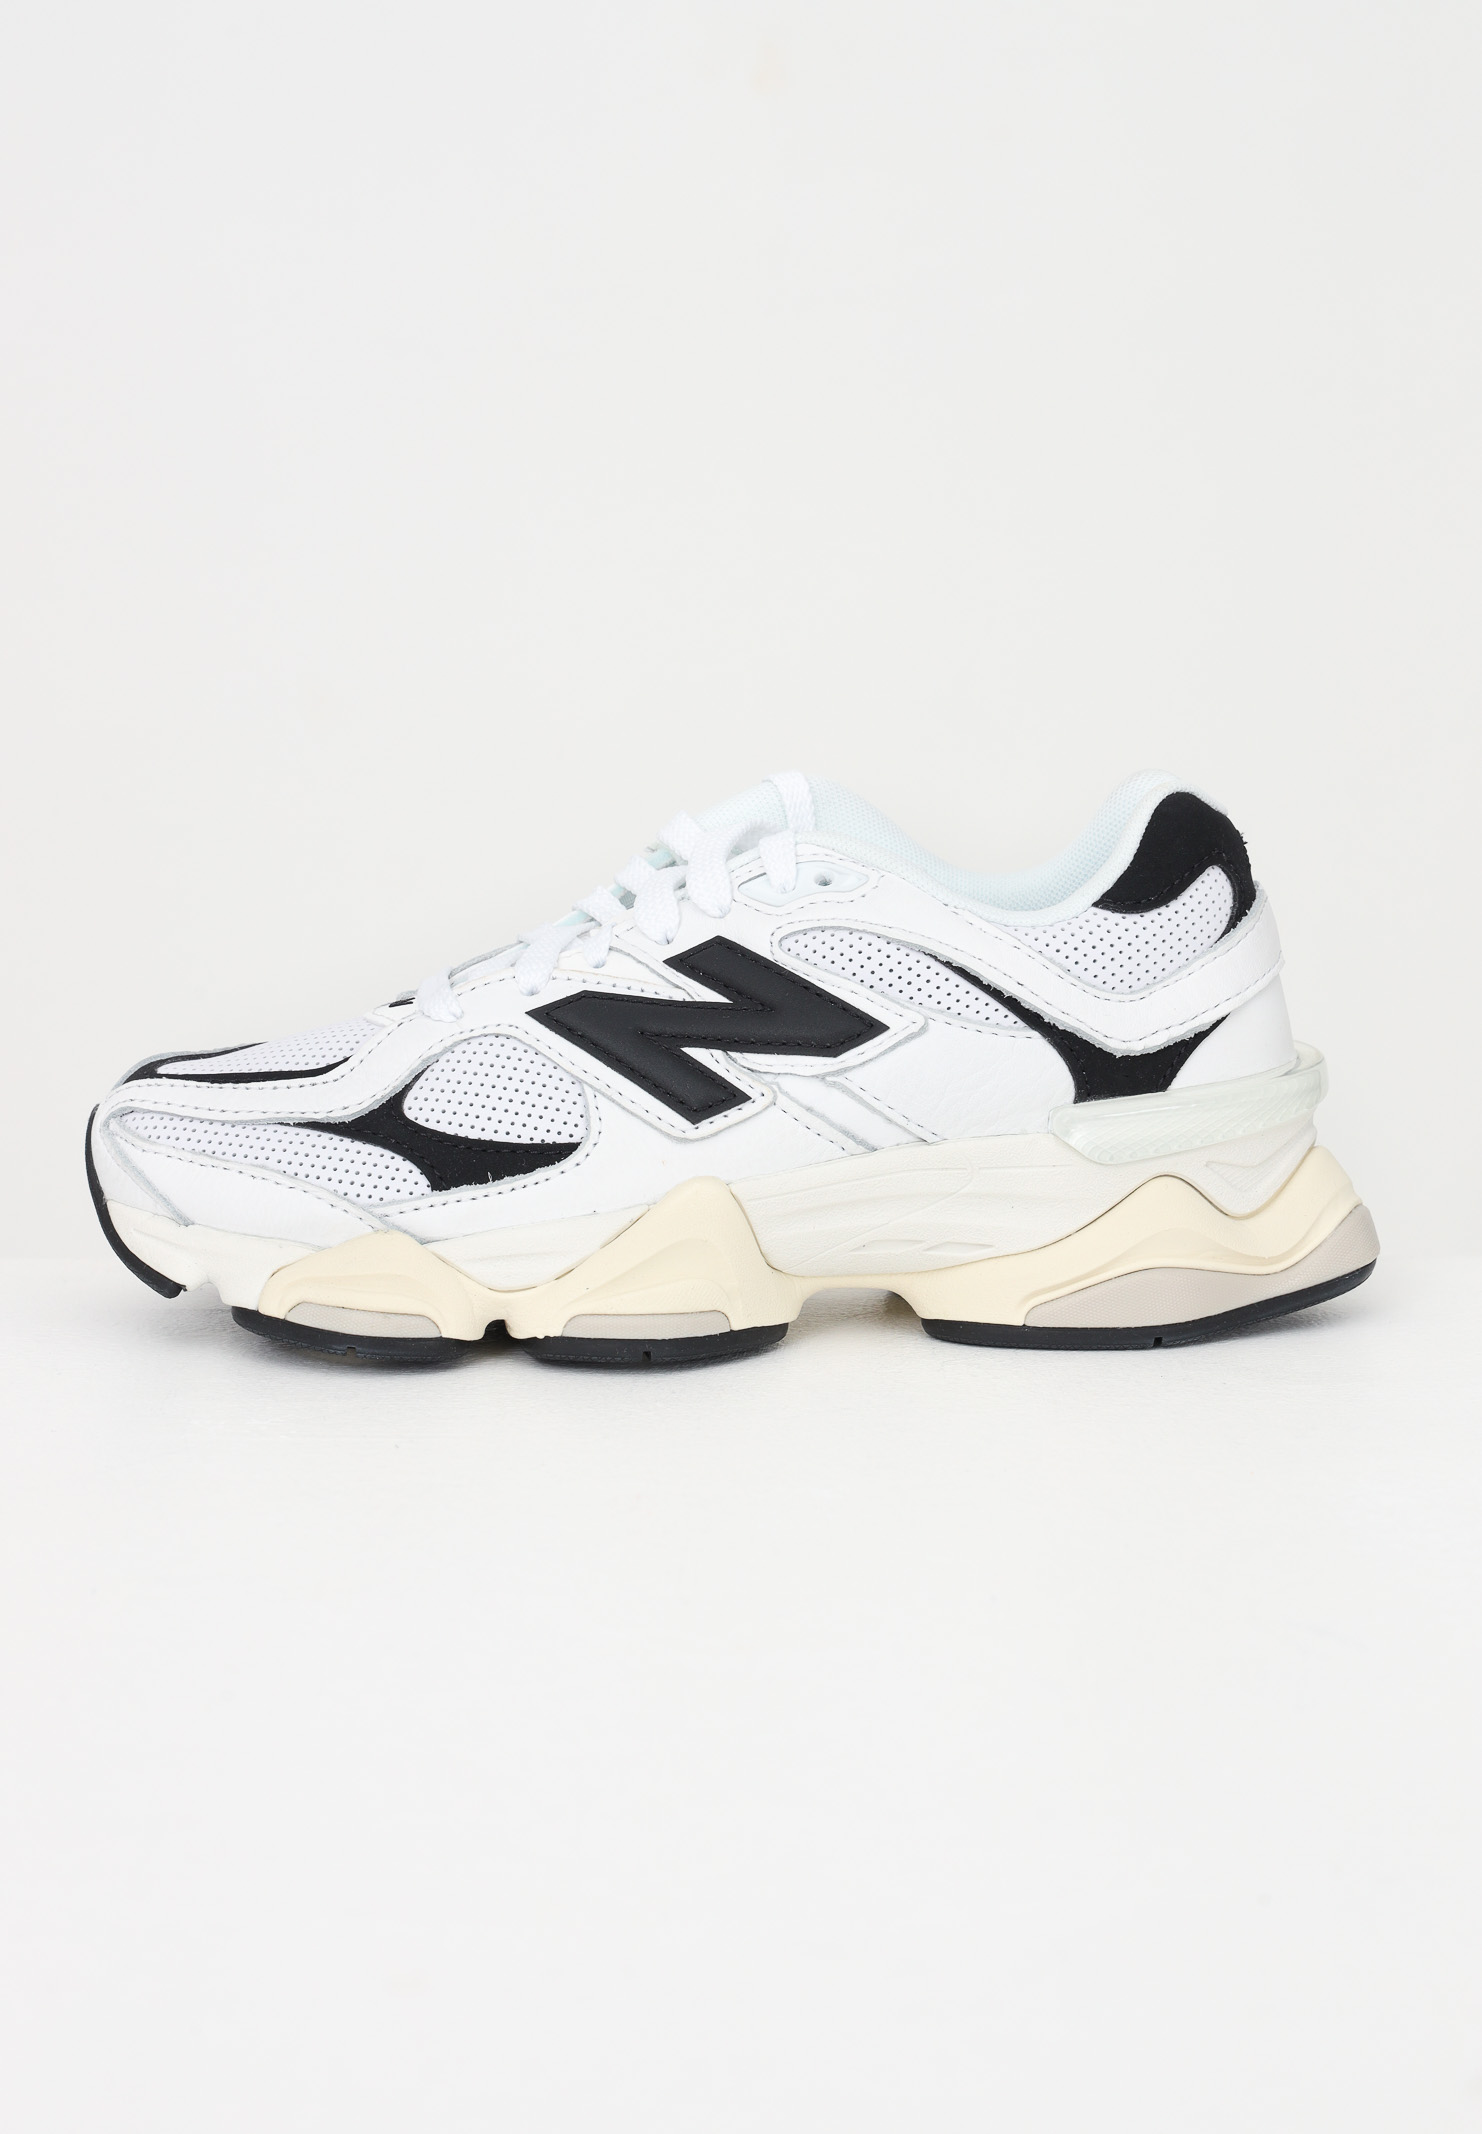 White casual sneakers for men and women 9060 - NEW BALANCE - Pavidas